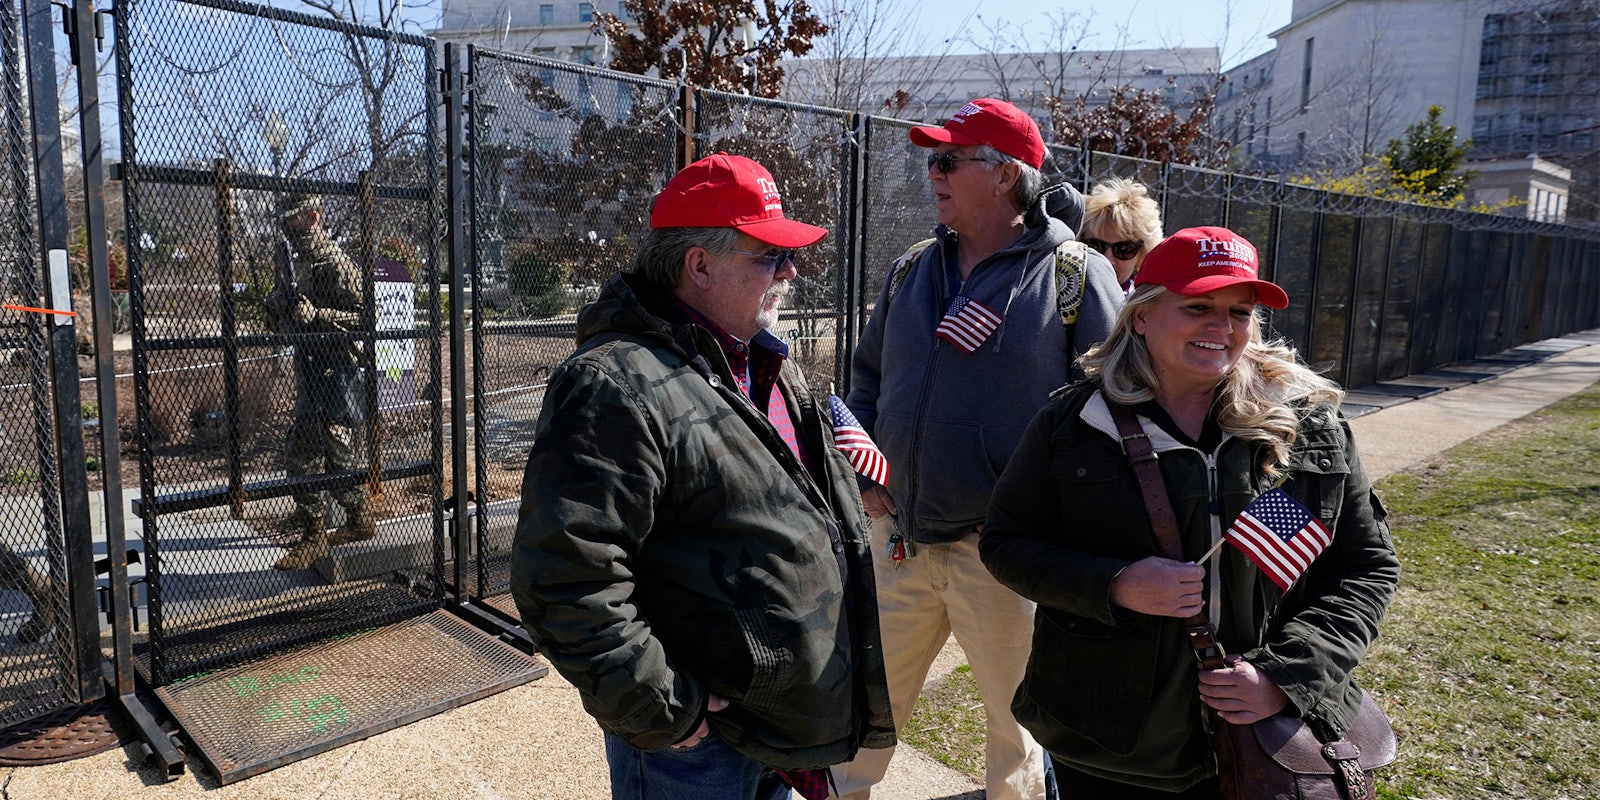 People in Trump caps stand outside fence in Washington DC holding small US flags